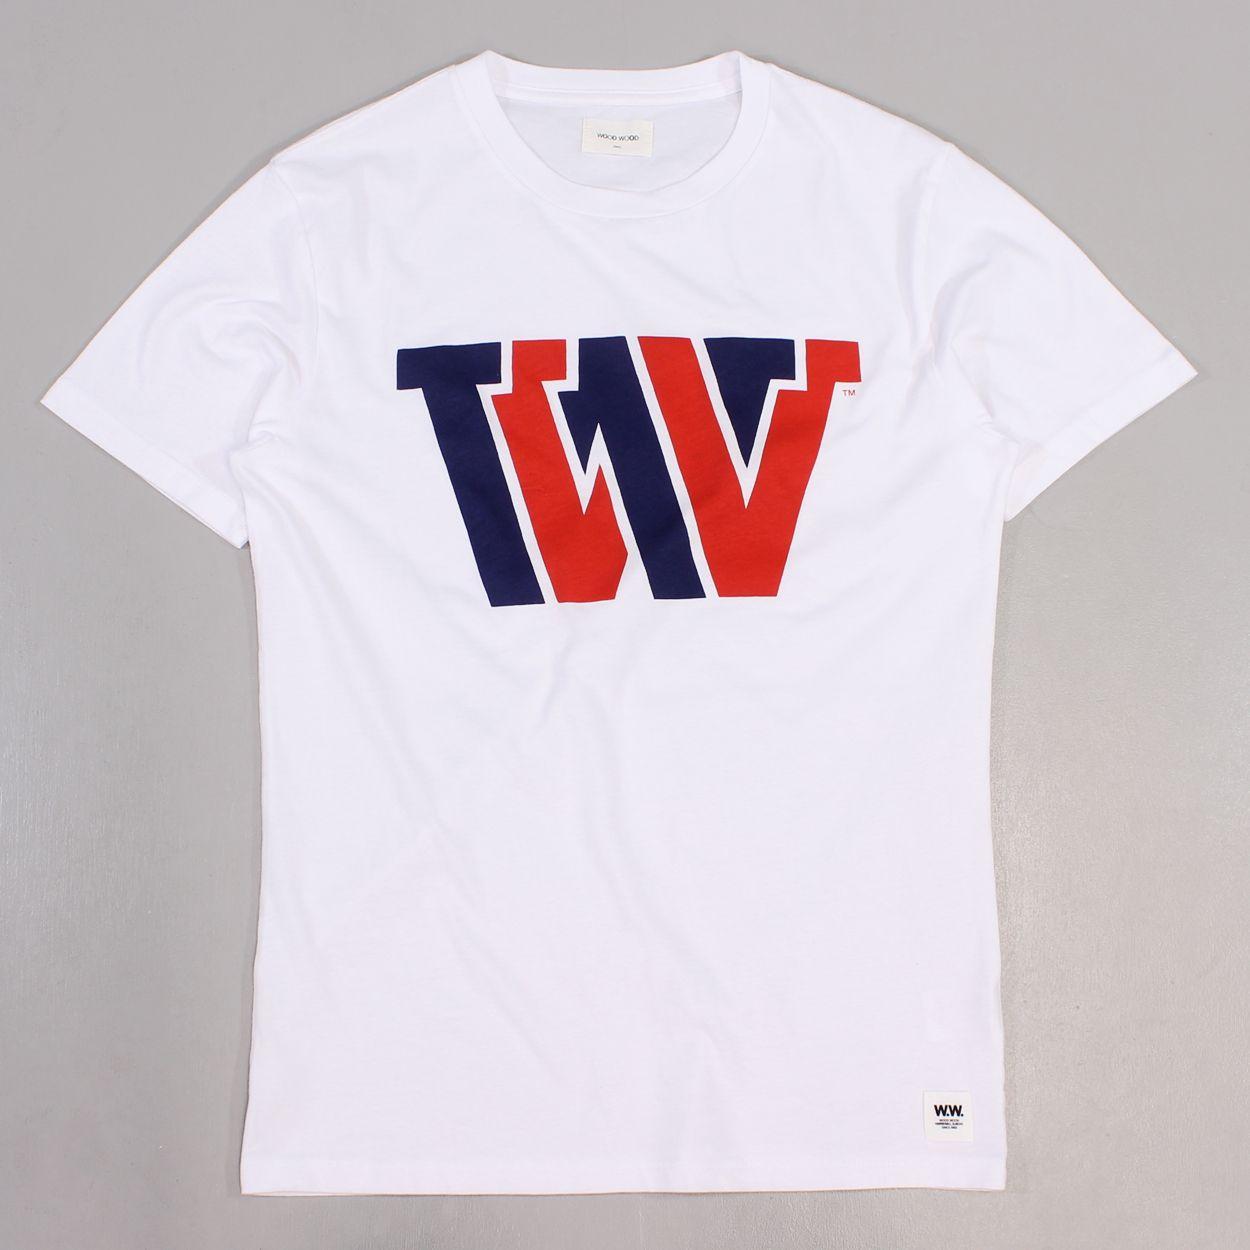 Short Red and Blue Logo - Wood Wood VVV Colour T Shirt White Red Blue